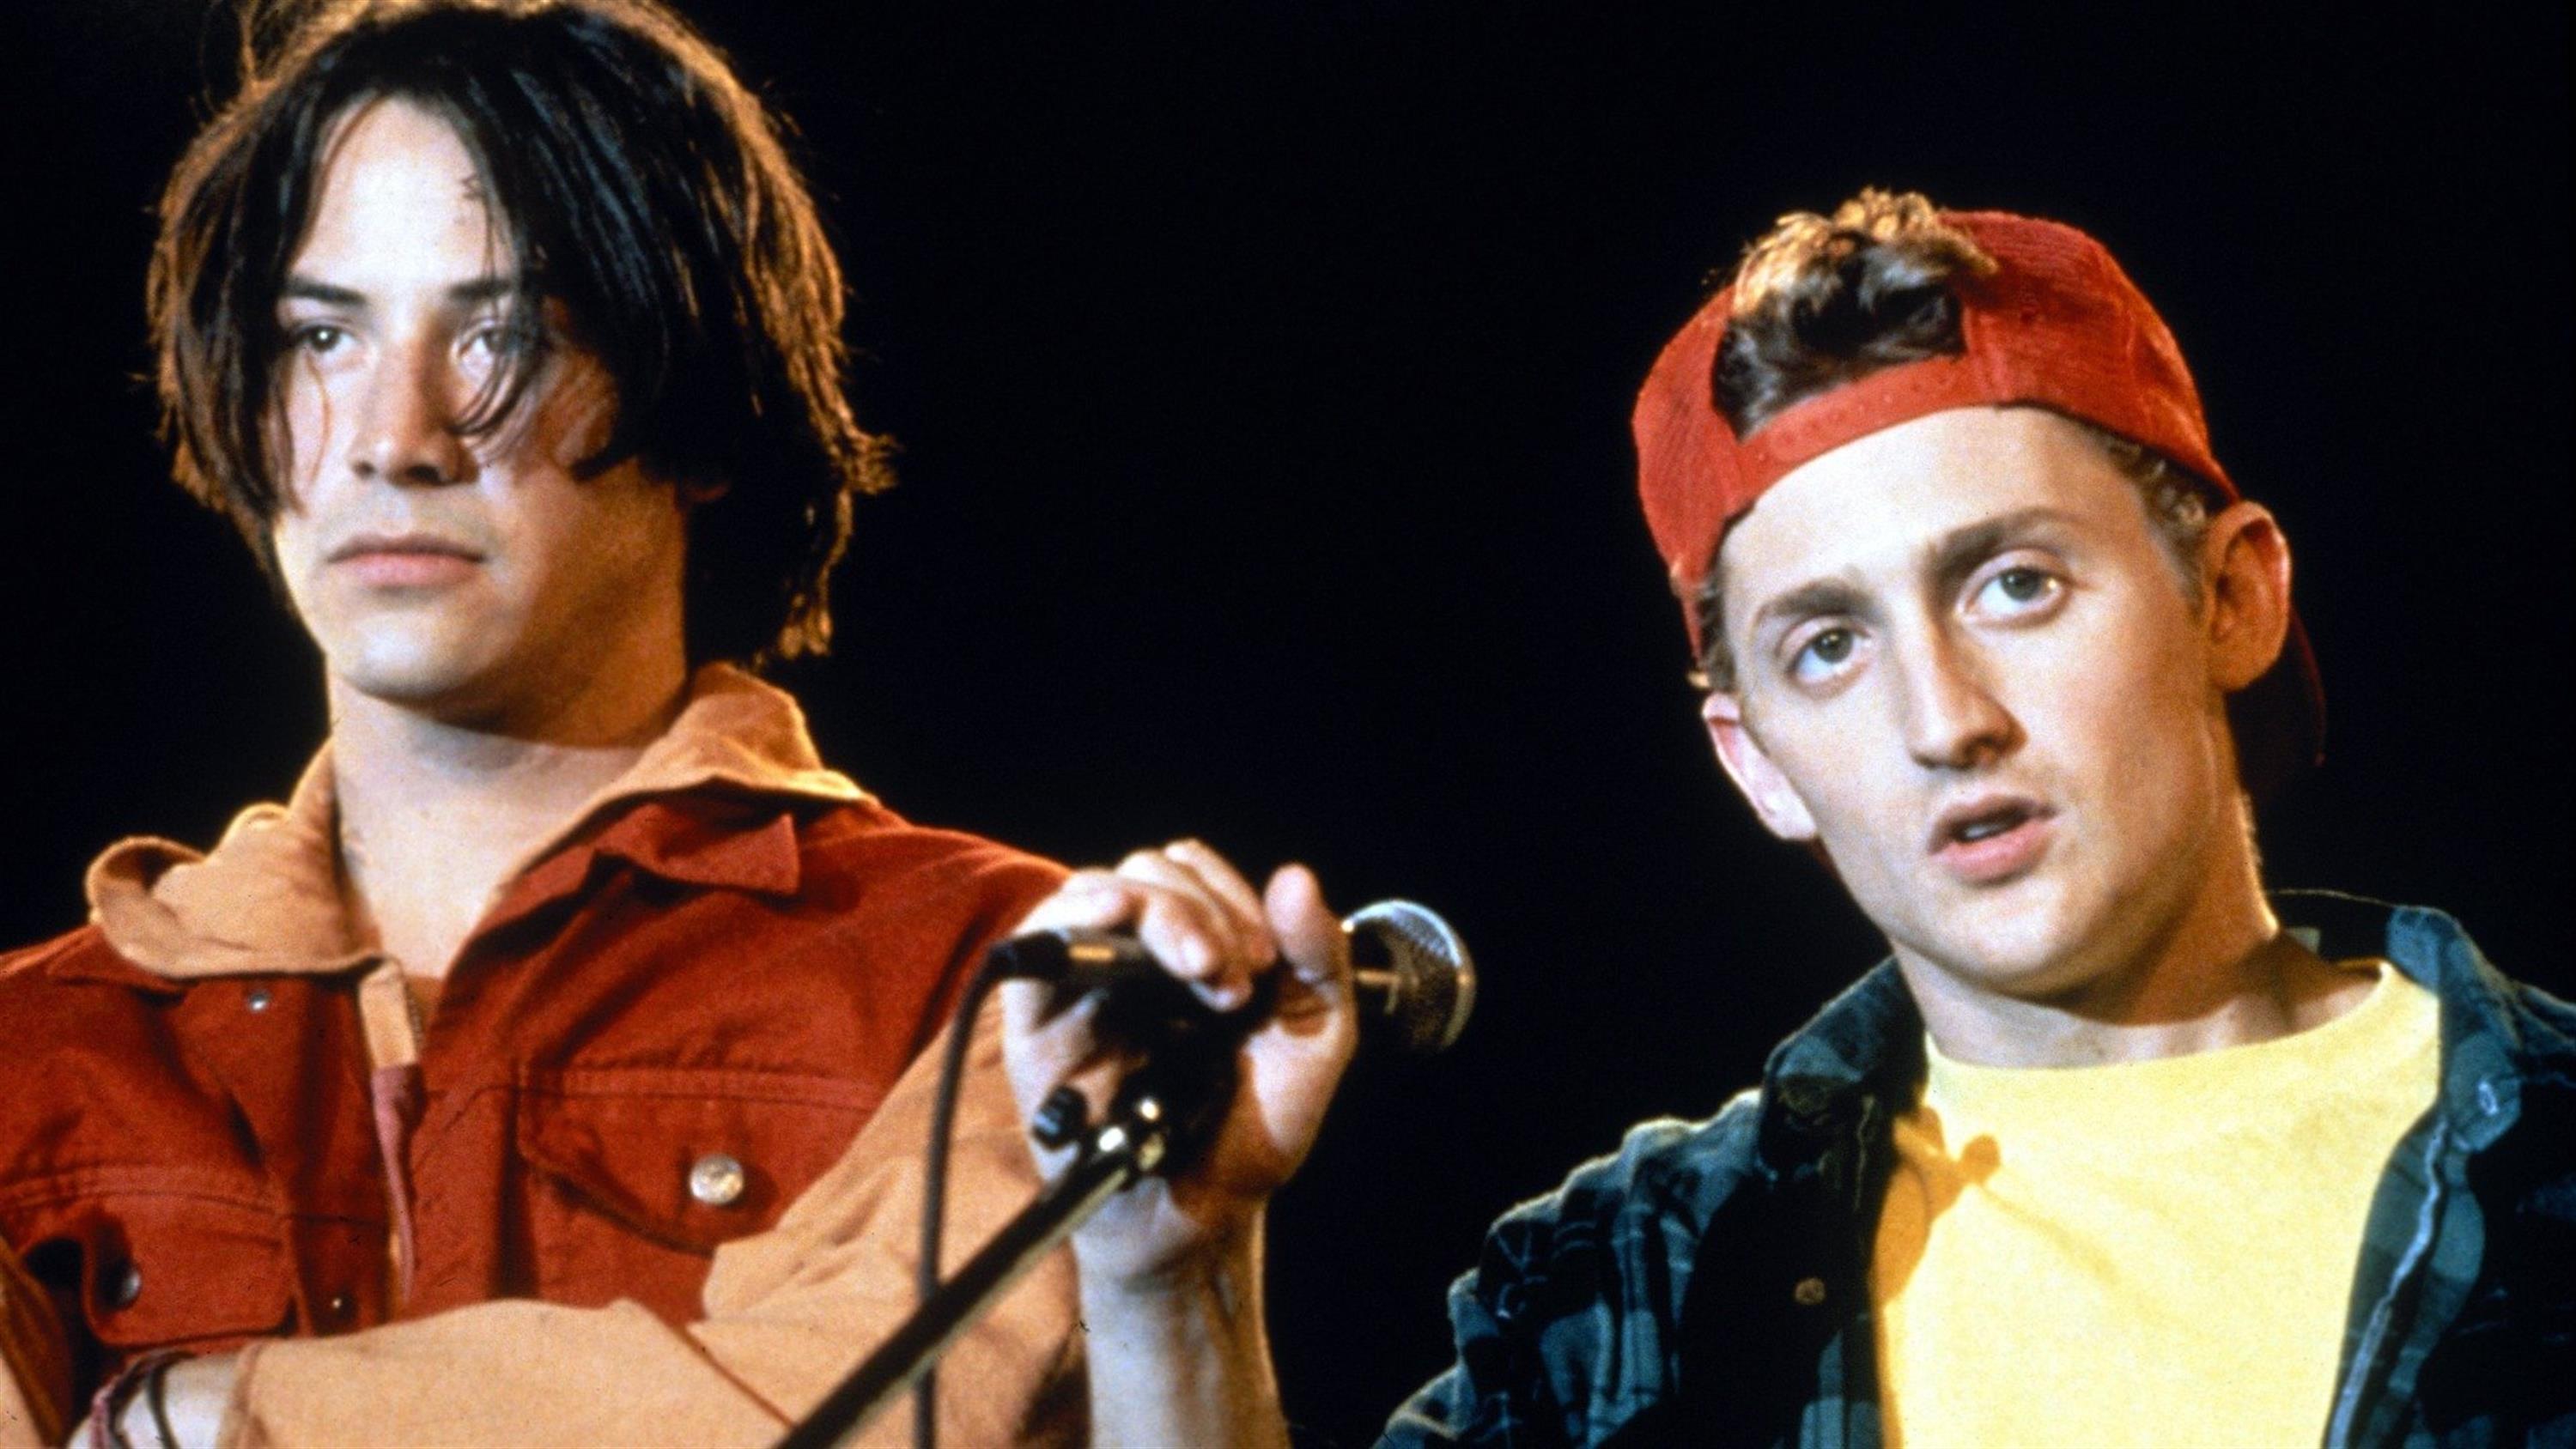 200826_4221294_Bill___Ted_s_Bogus_Journey_3000x1688_1783184451624